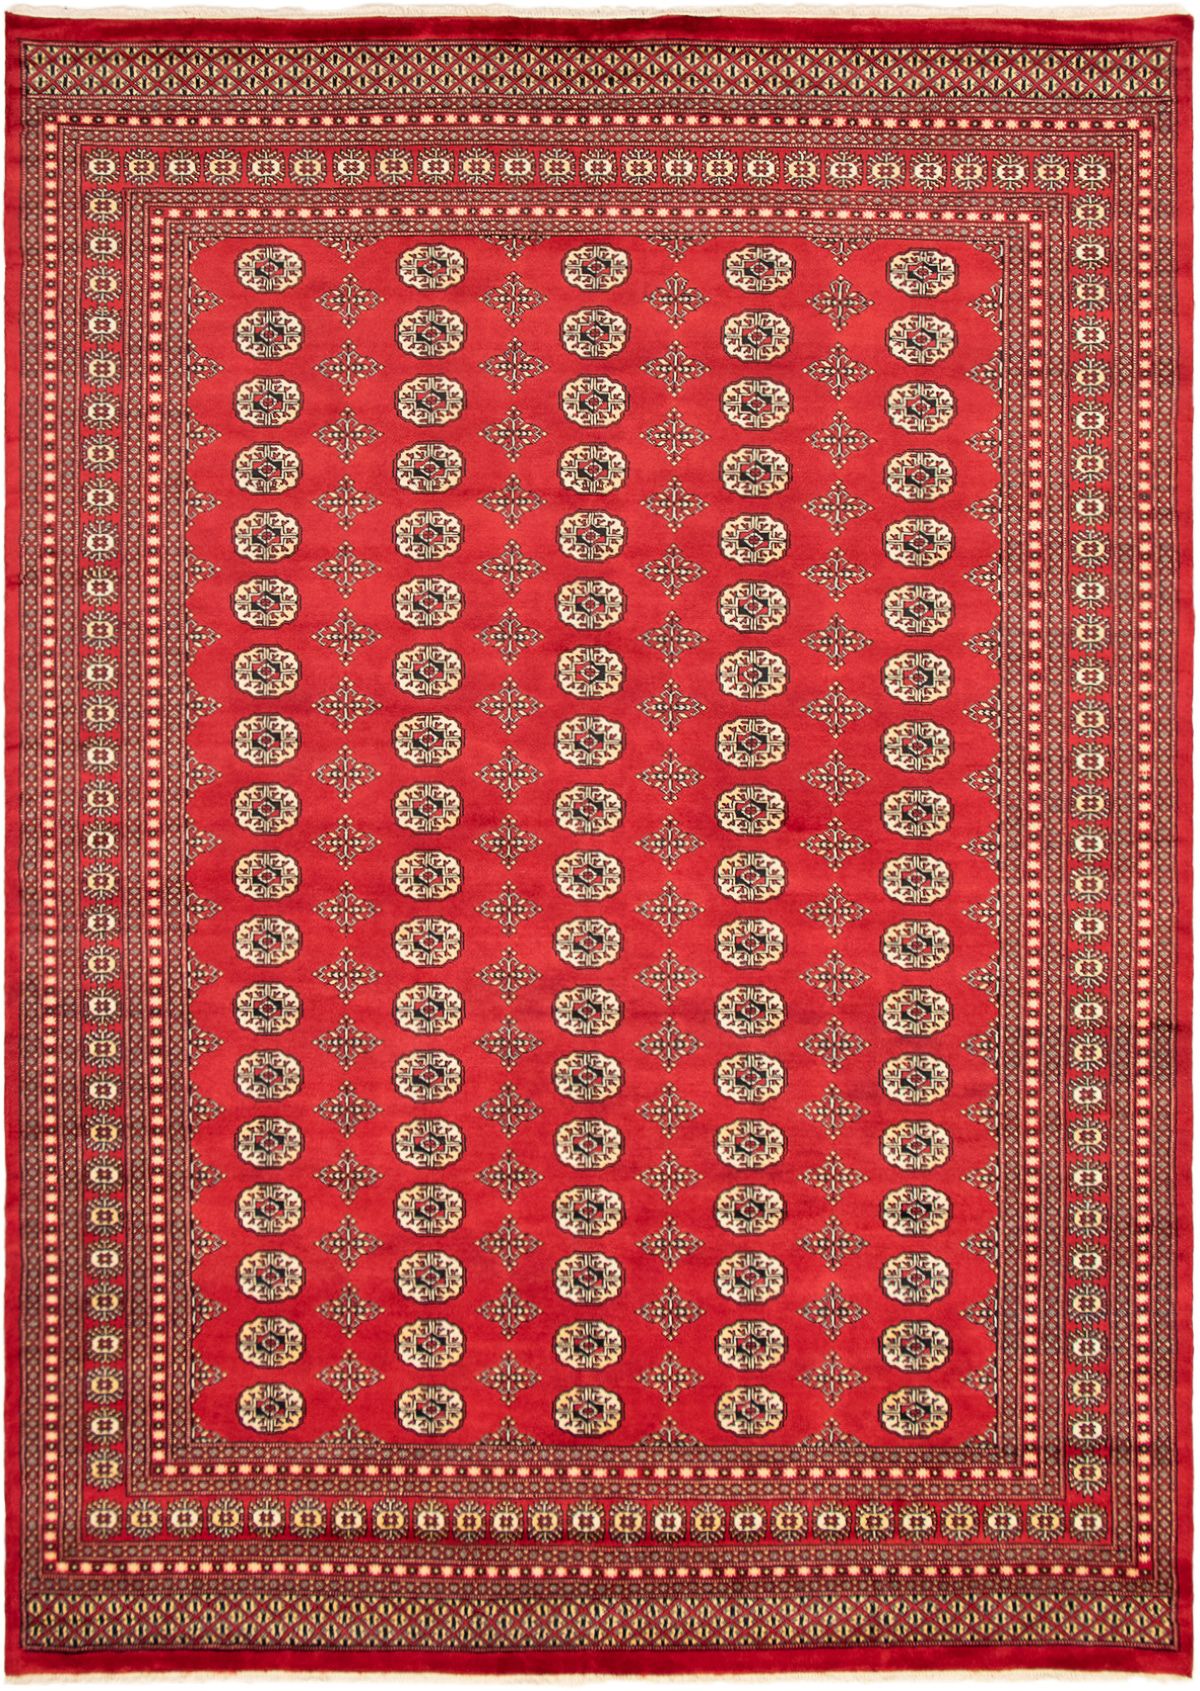 Hand-knotted Finest Peshawar Bokhara Red Wool Rug 8'2" x 9'7" Size: 8'2" x 9'7"  